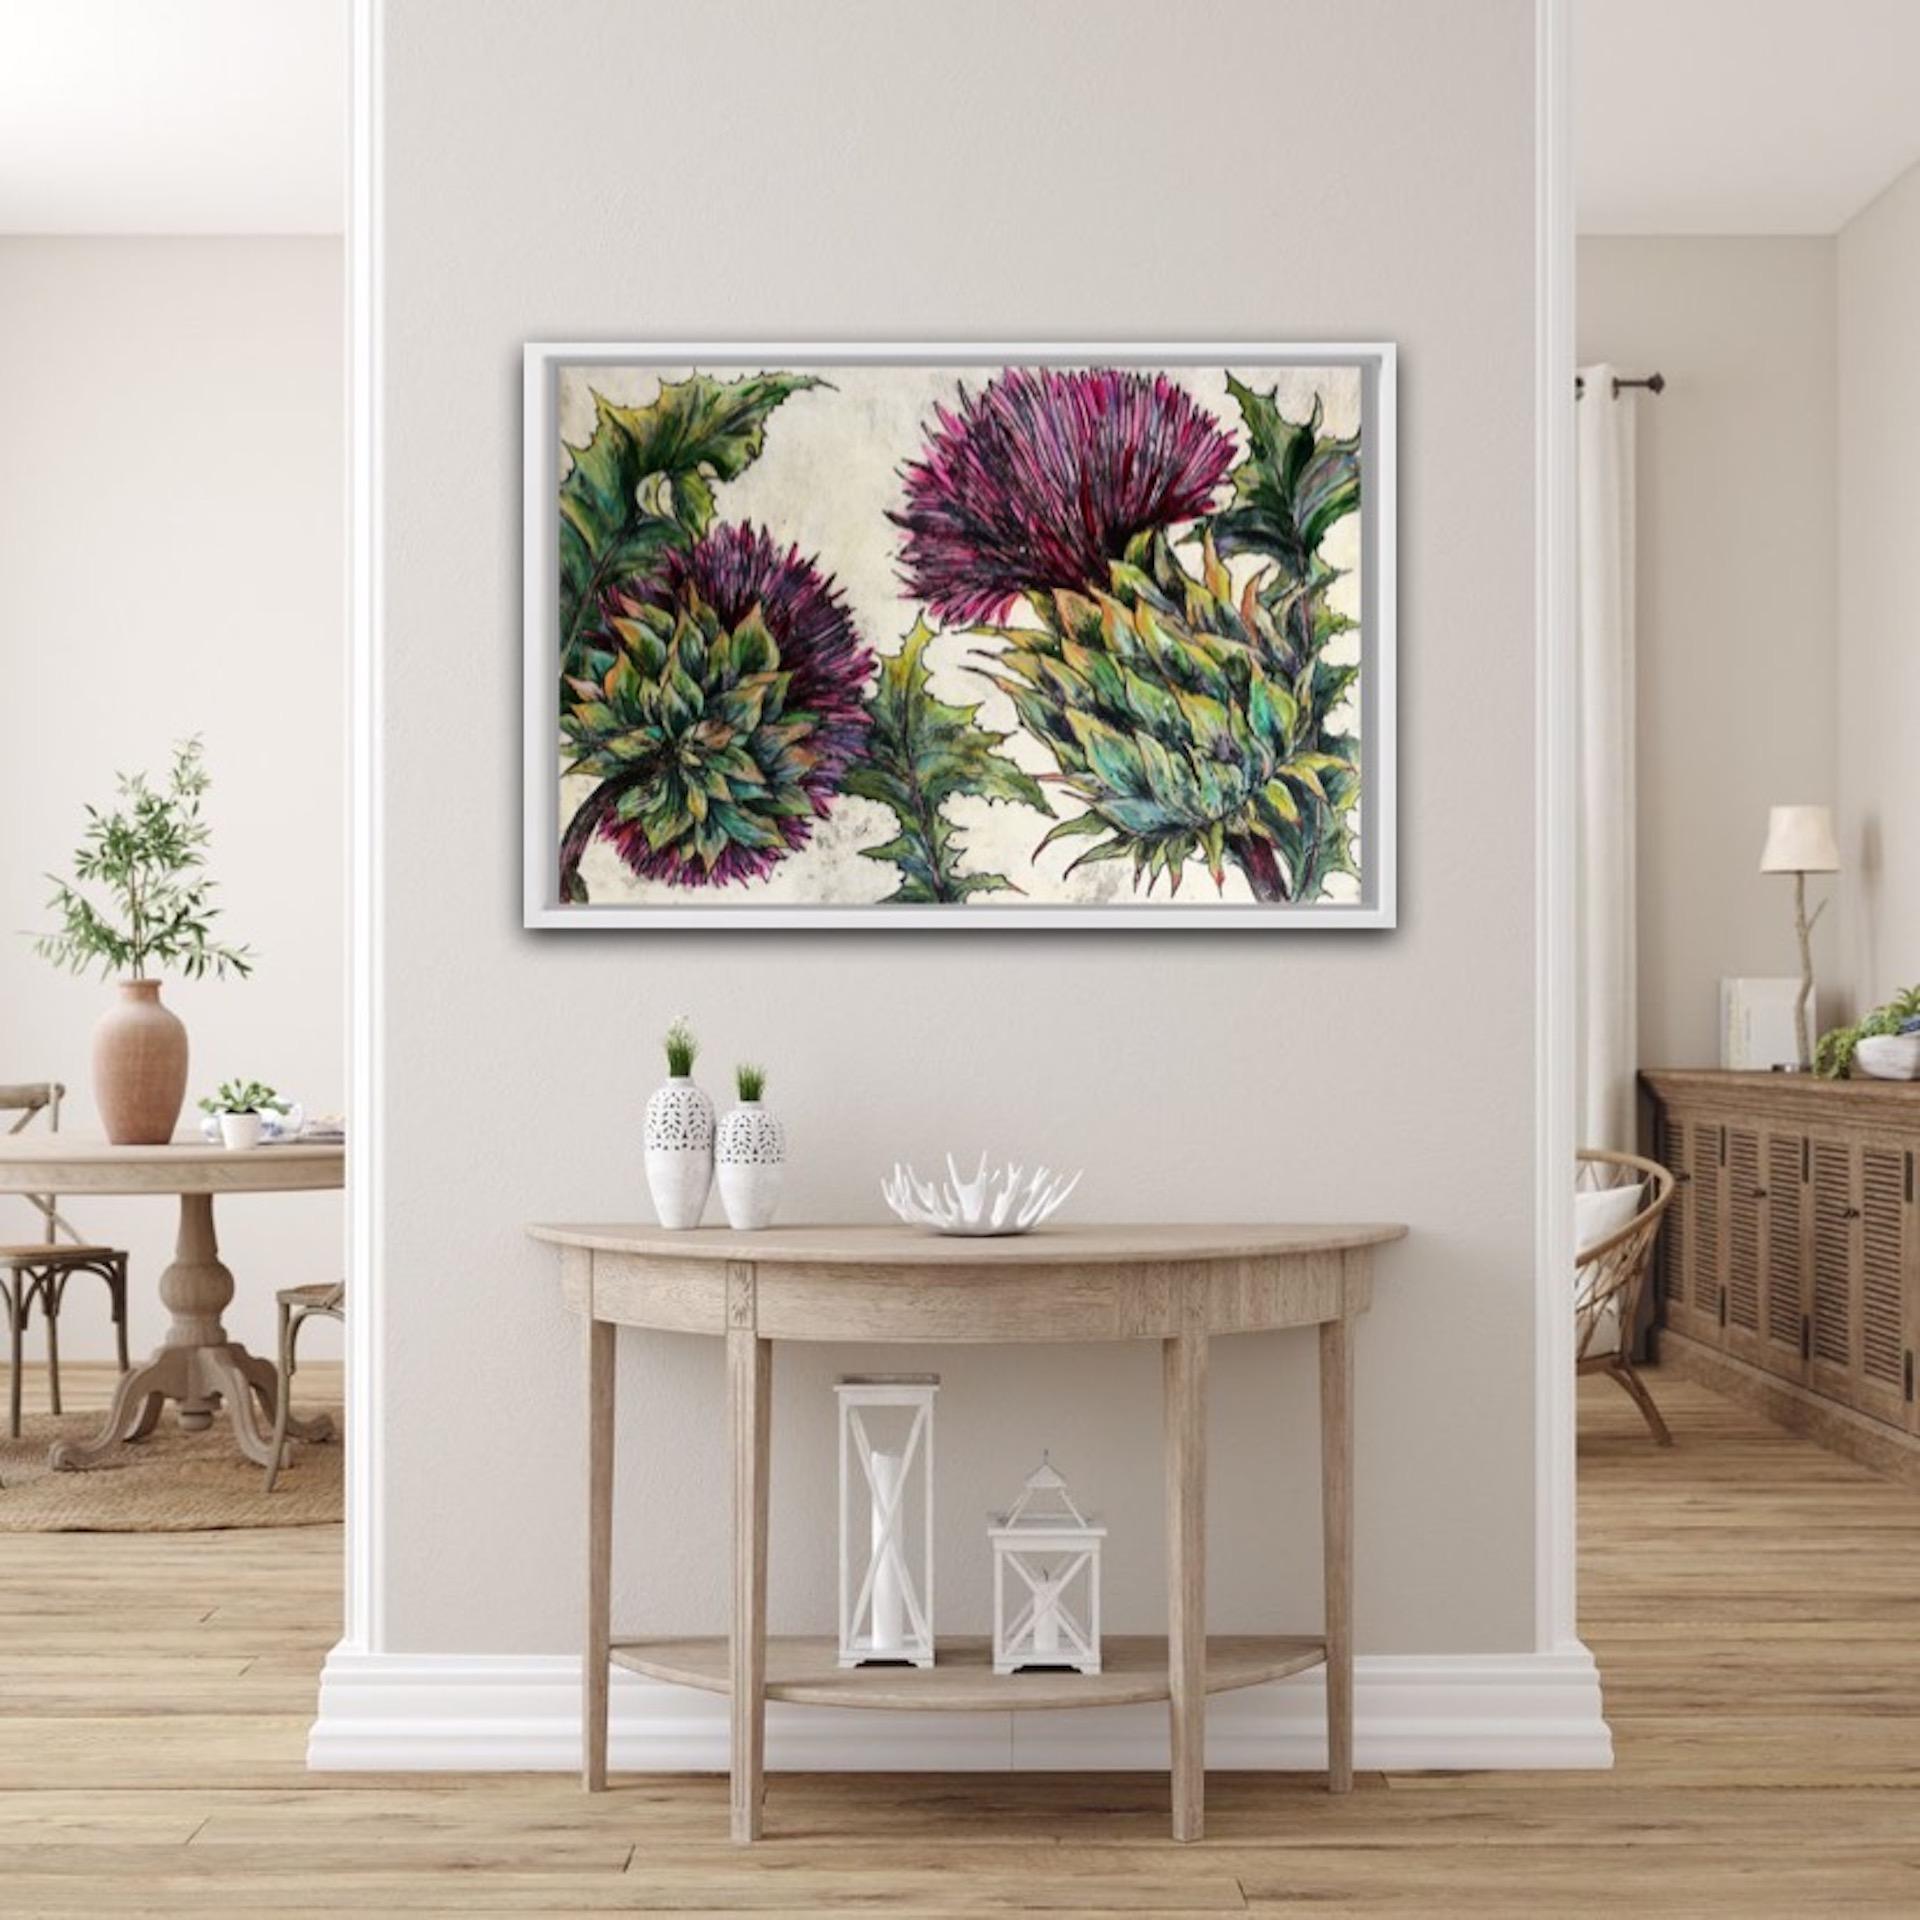 Cardoon, still life, nature, flower, limited edition print - Contemporary Print by Vicky Oldfield